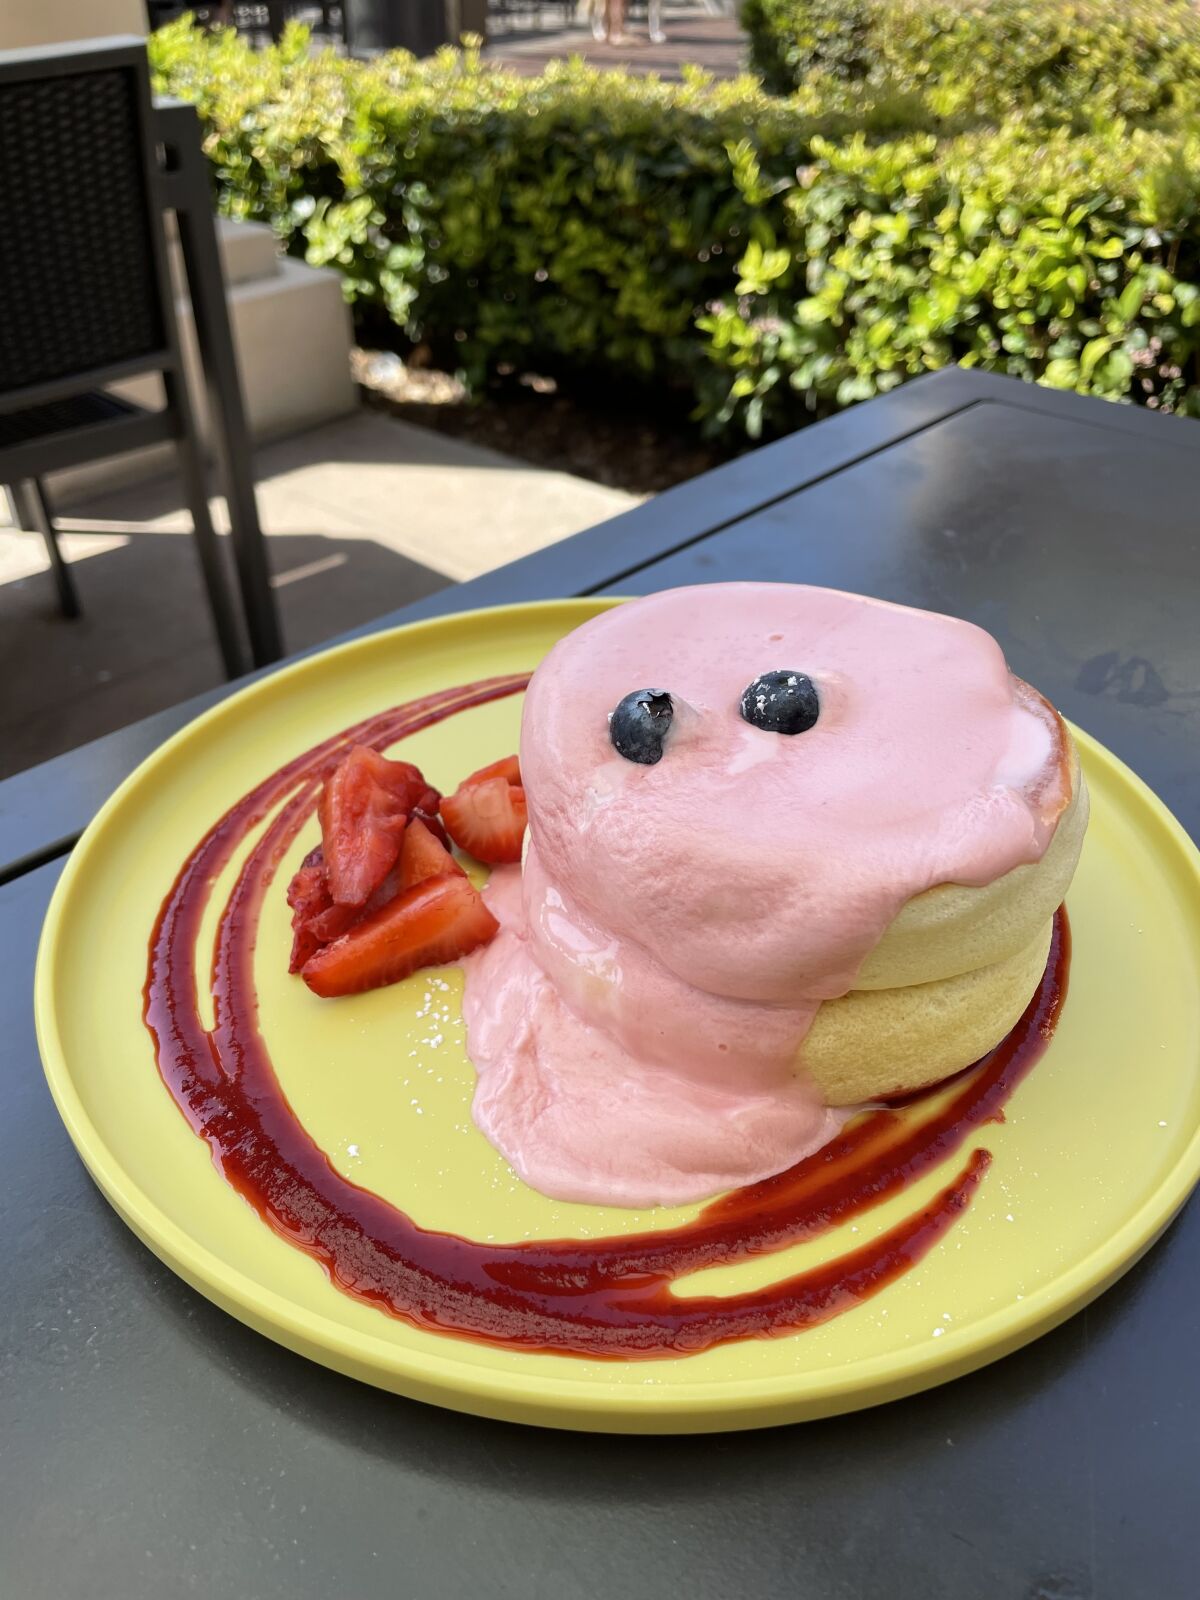 A souffle pancake with strawberry cream at Burnt Crumbs in Irvine.